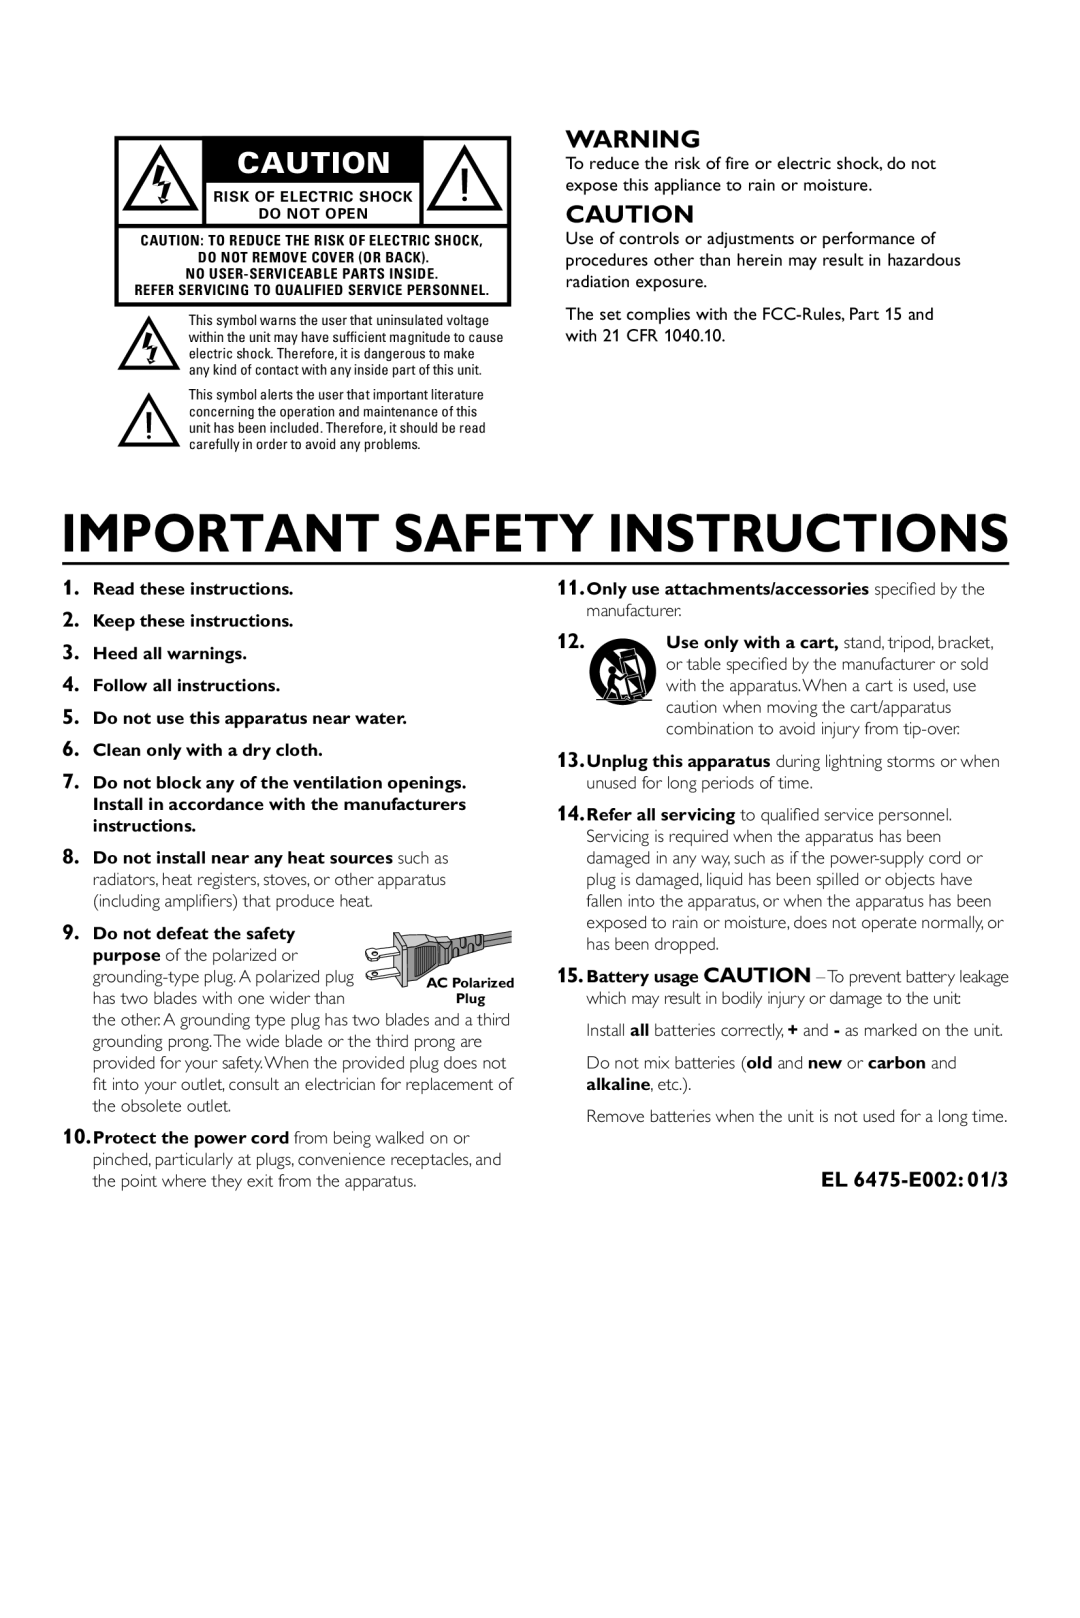 Yamaha DVD-C940 Important Safety Instructions, Read these instructions, Keep these instructions 3.Heed all warnings 